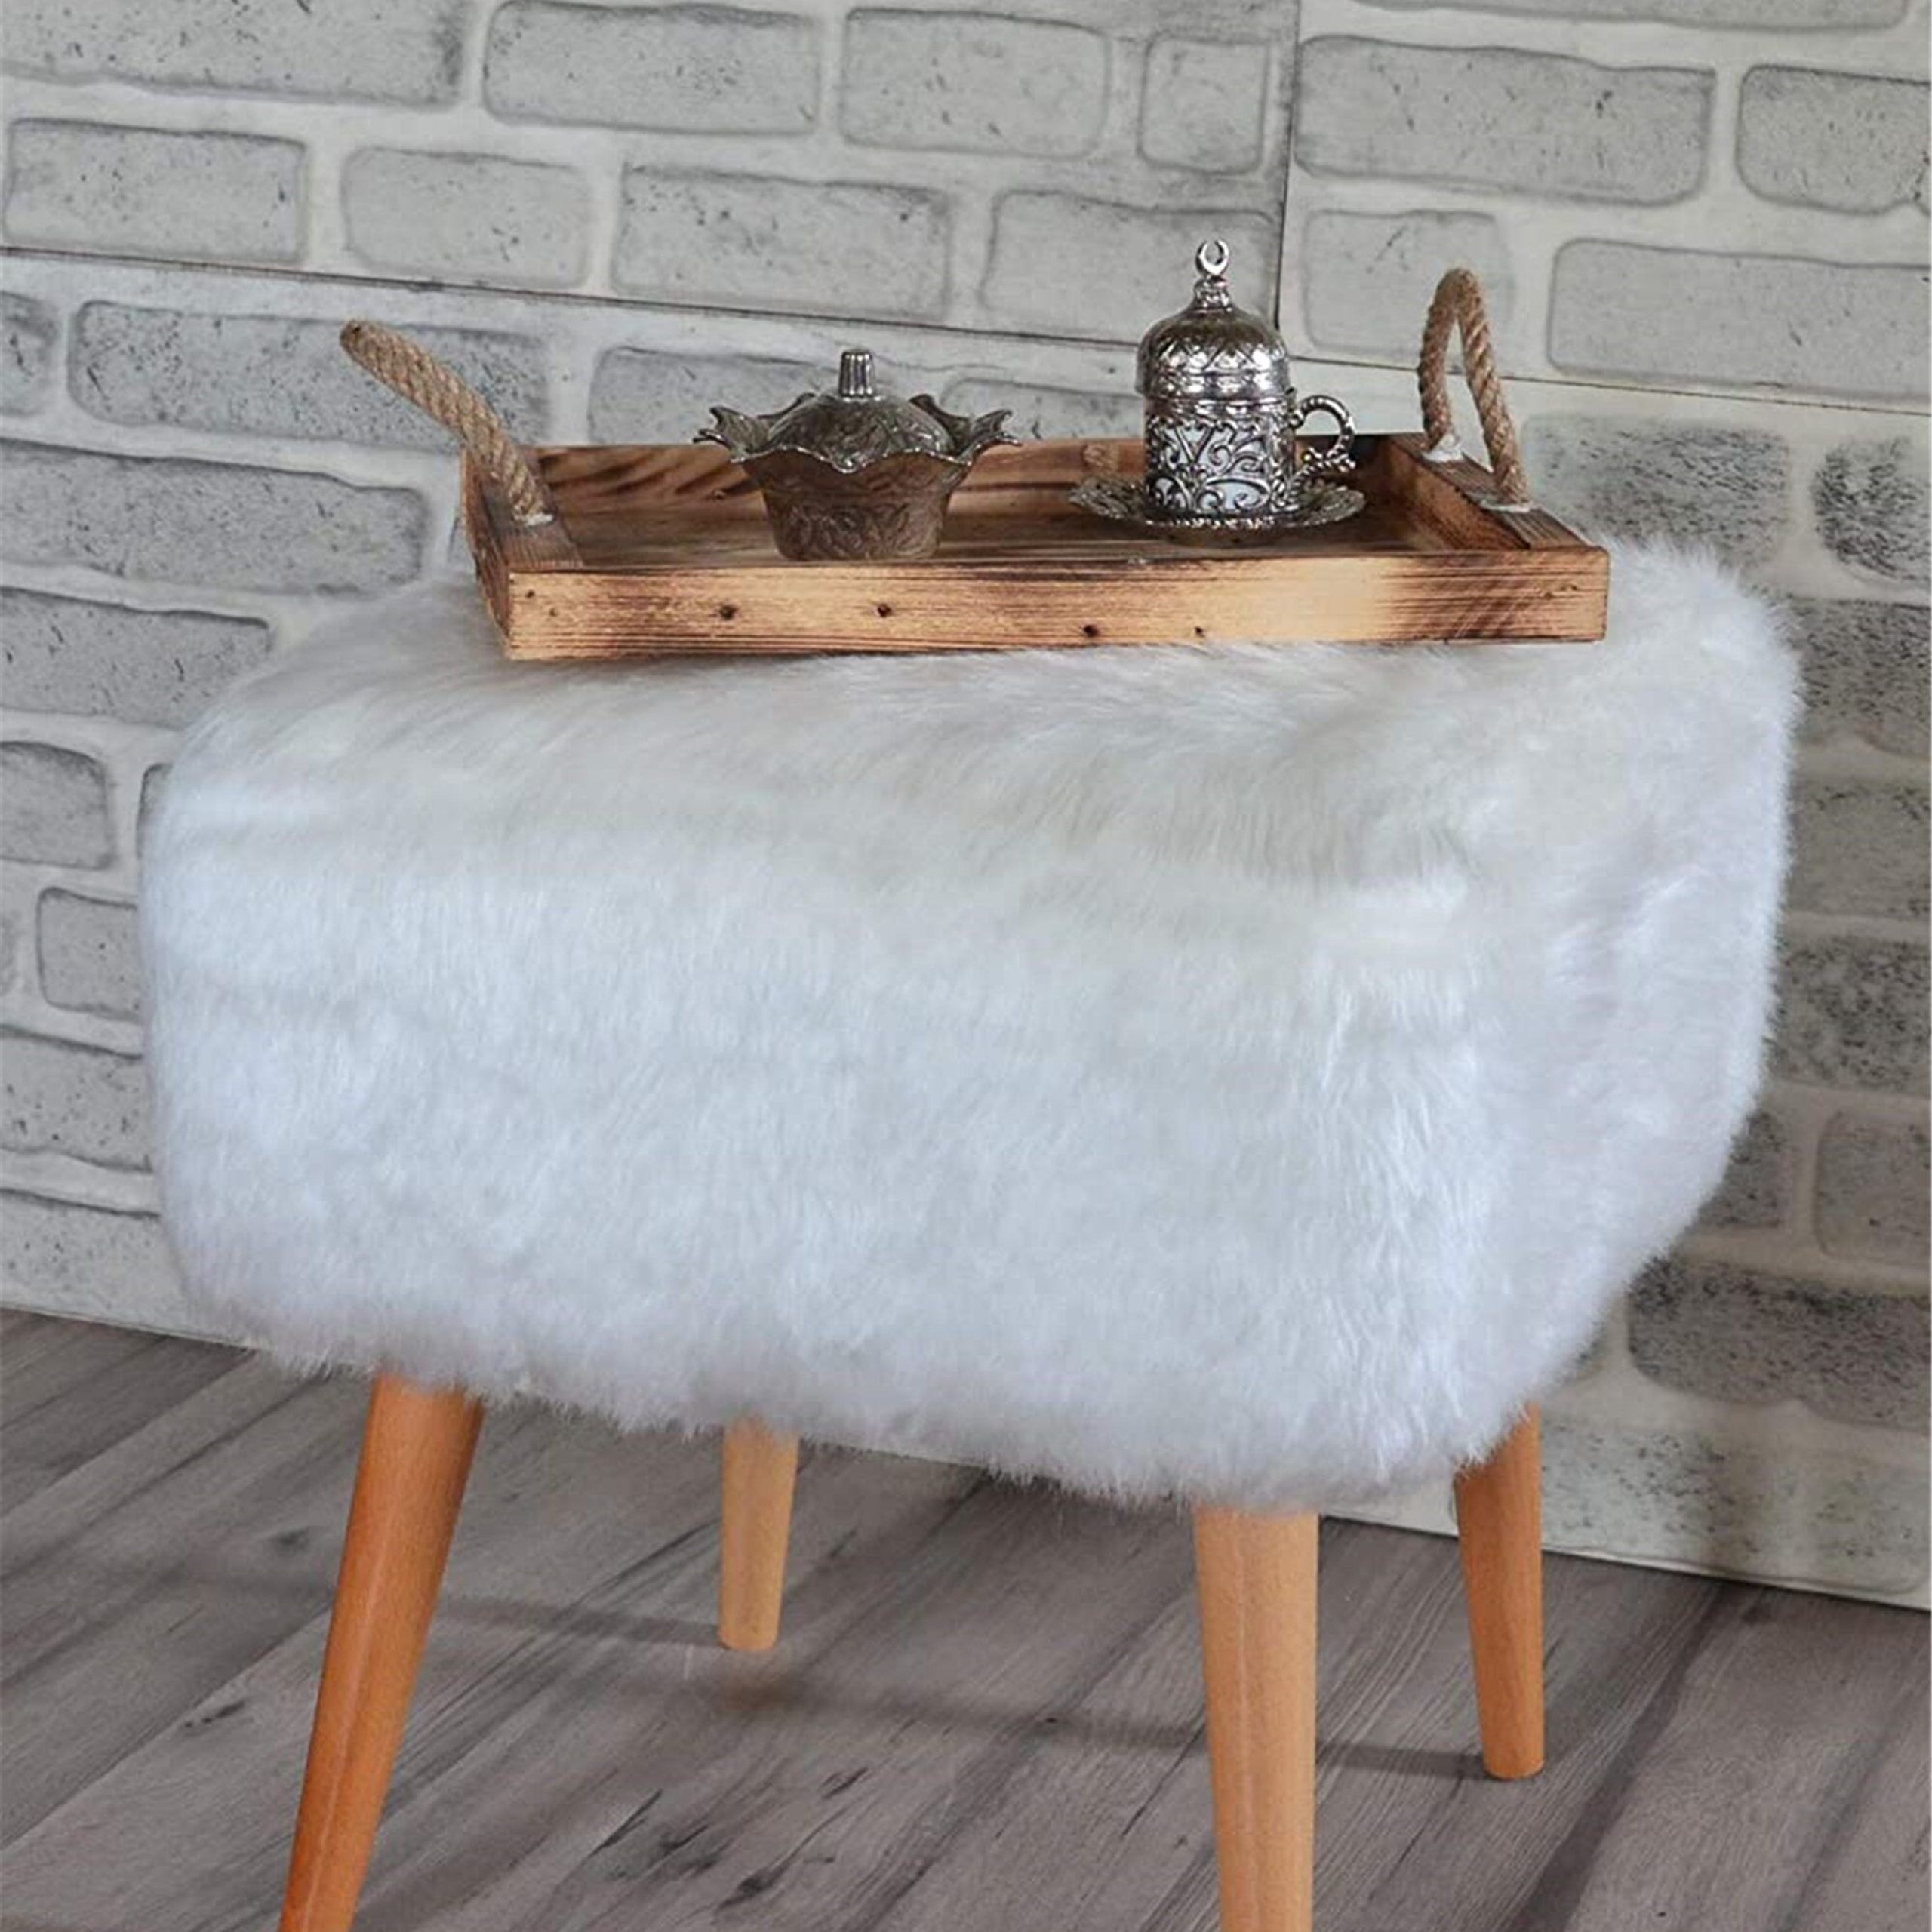 Square Faux Fur Stool For Vanity Furry Ottoman Seat With | Etsy Pertaining To Charcoal Brown Faux Fur Square Ottomans (View 6 of 20)